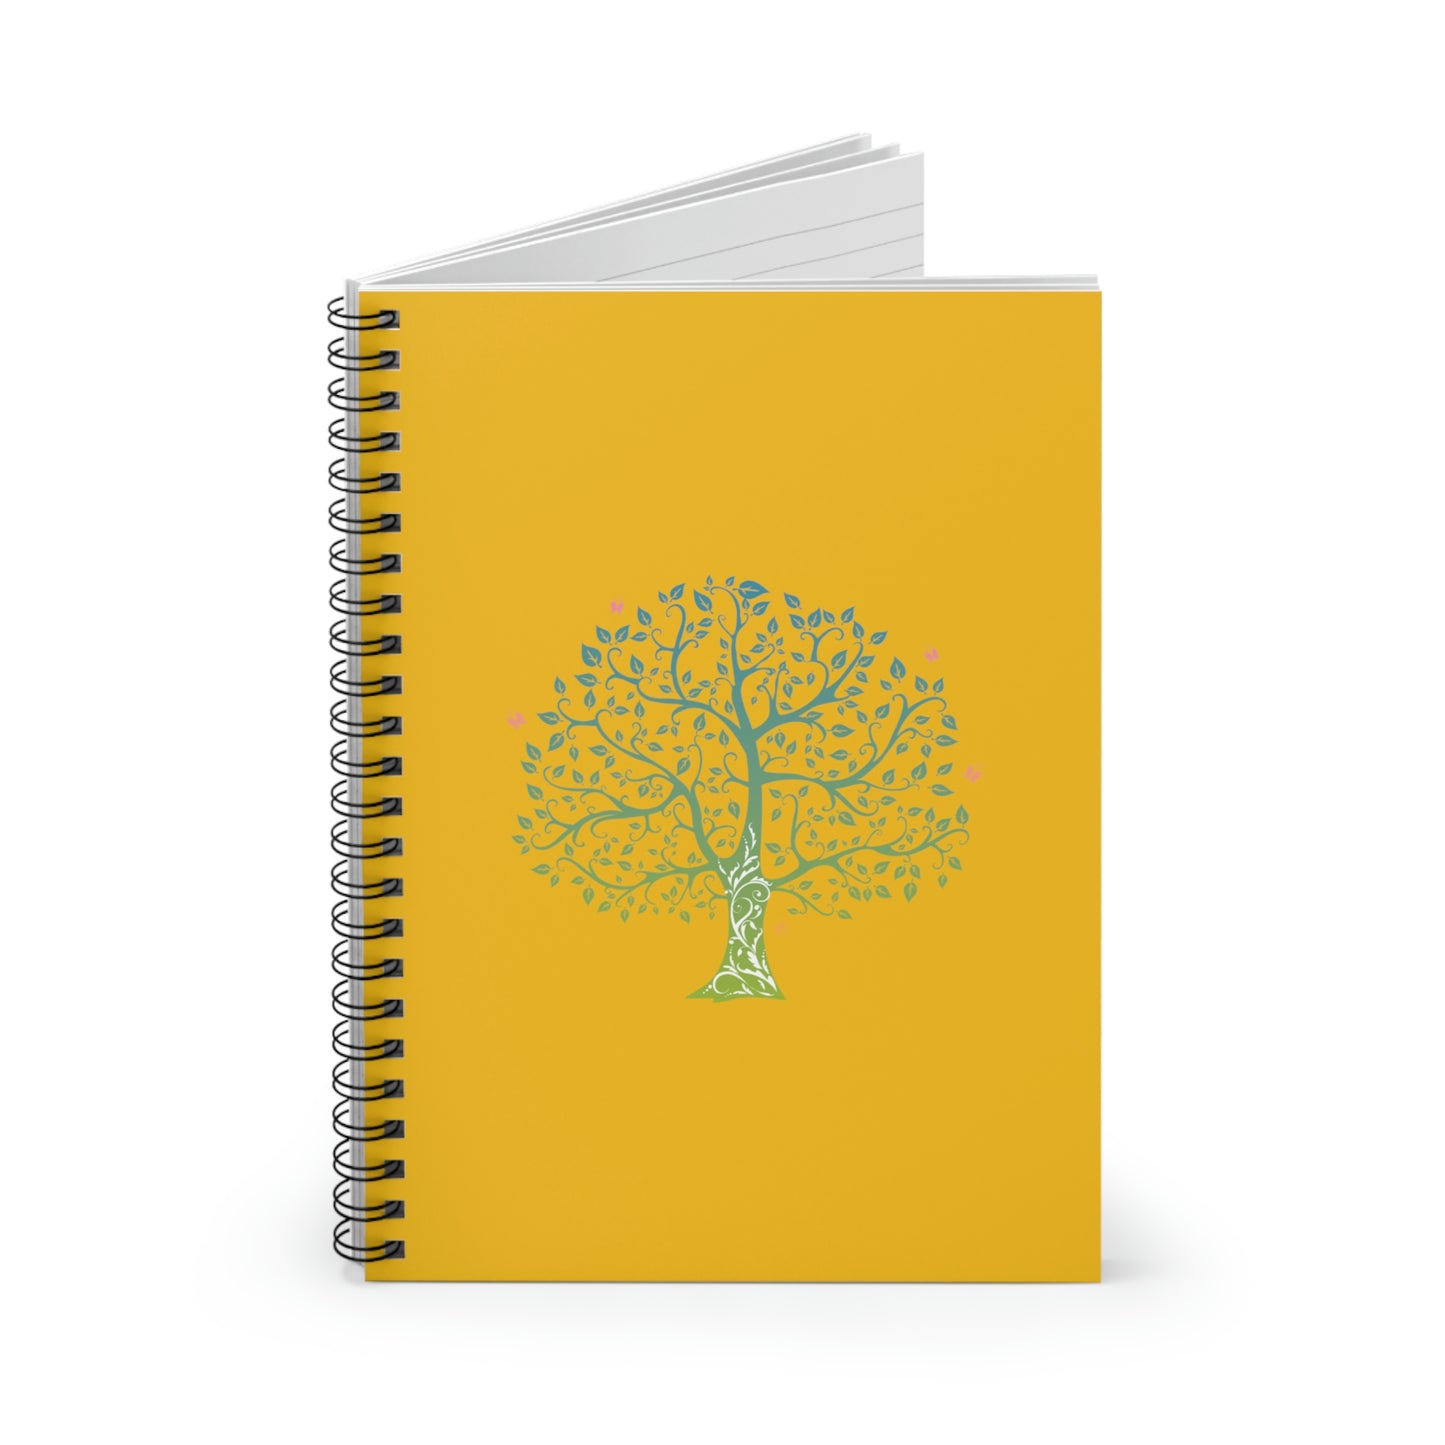 Tree of Life - Spiral Notebook - Ruled Line - Yellow Cover